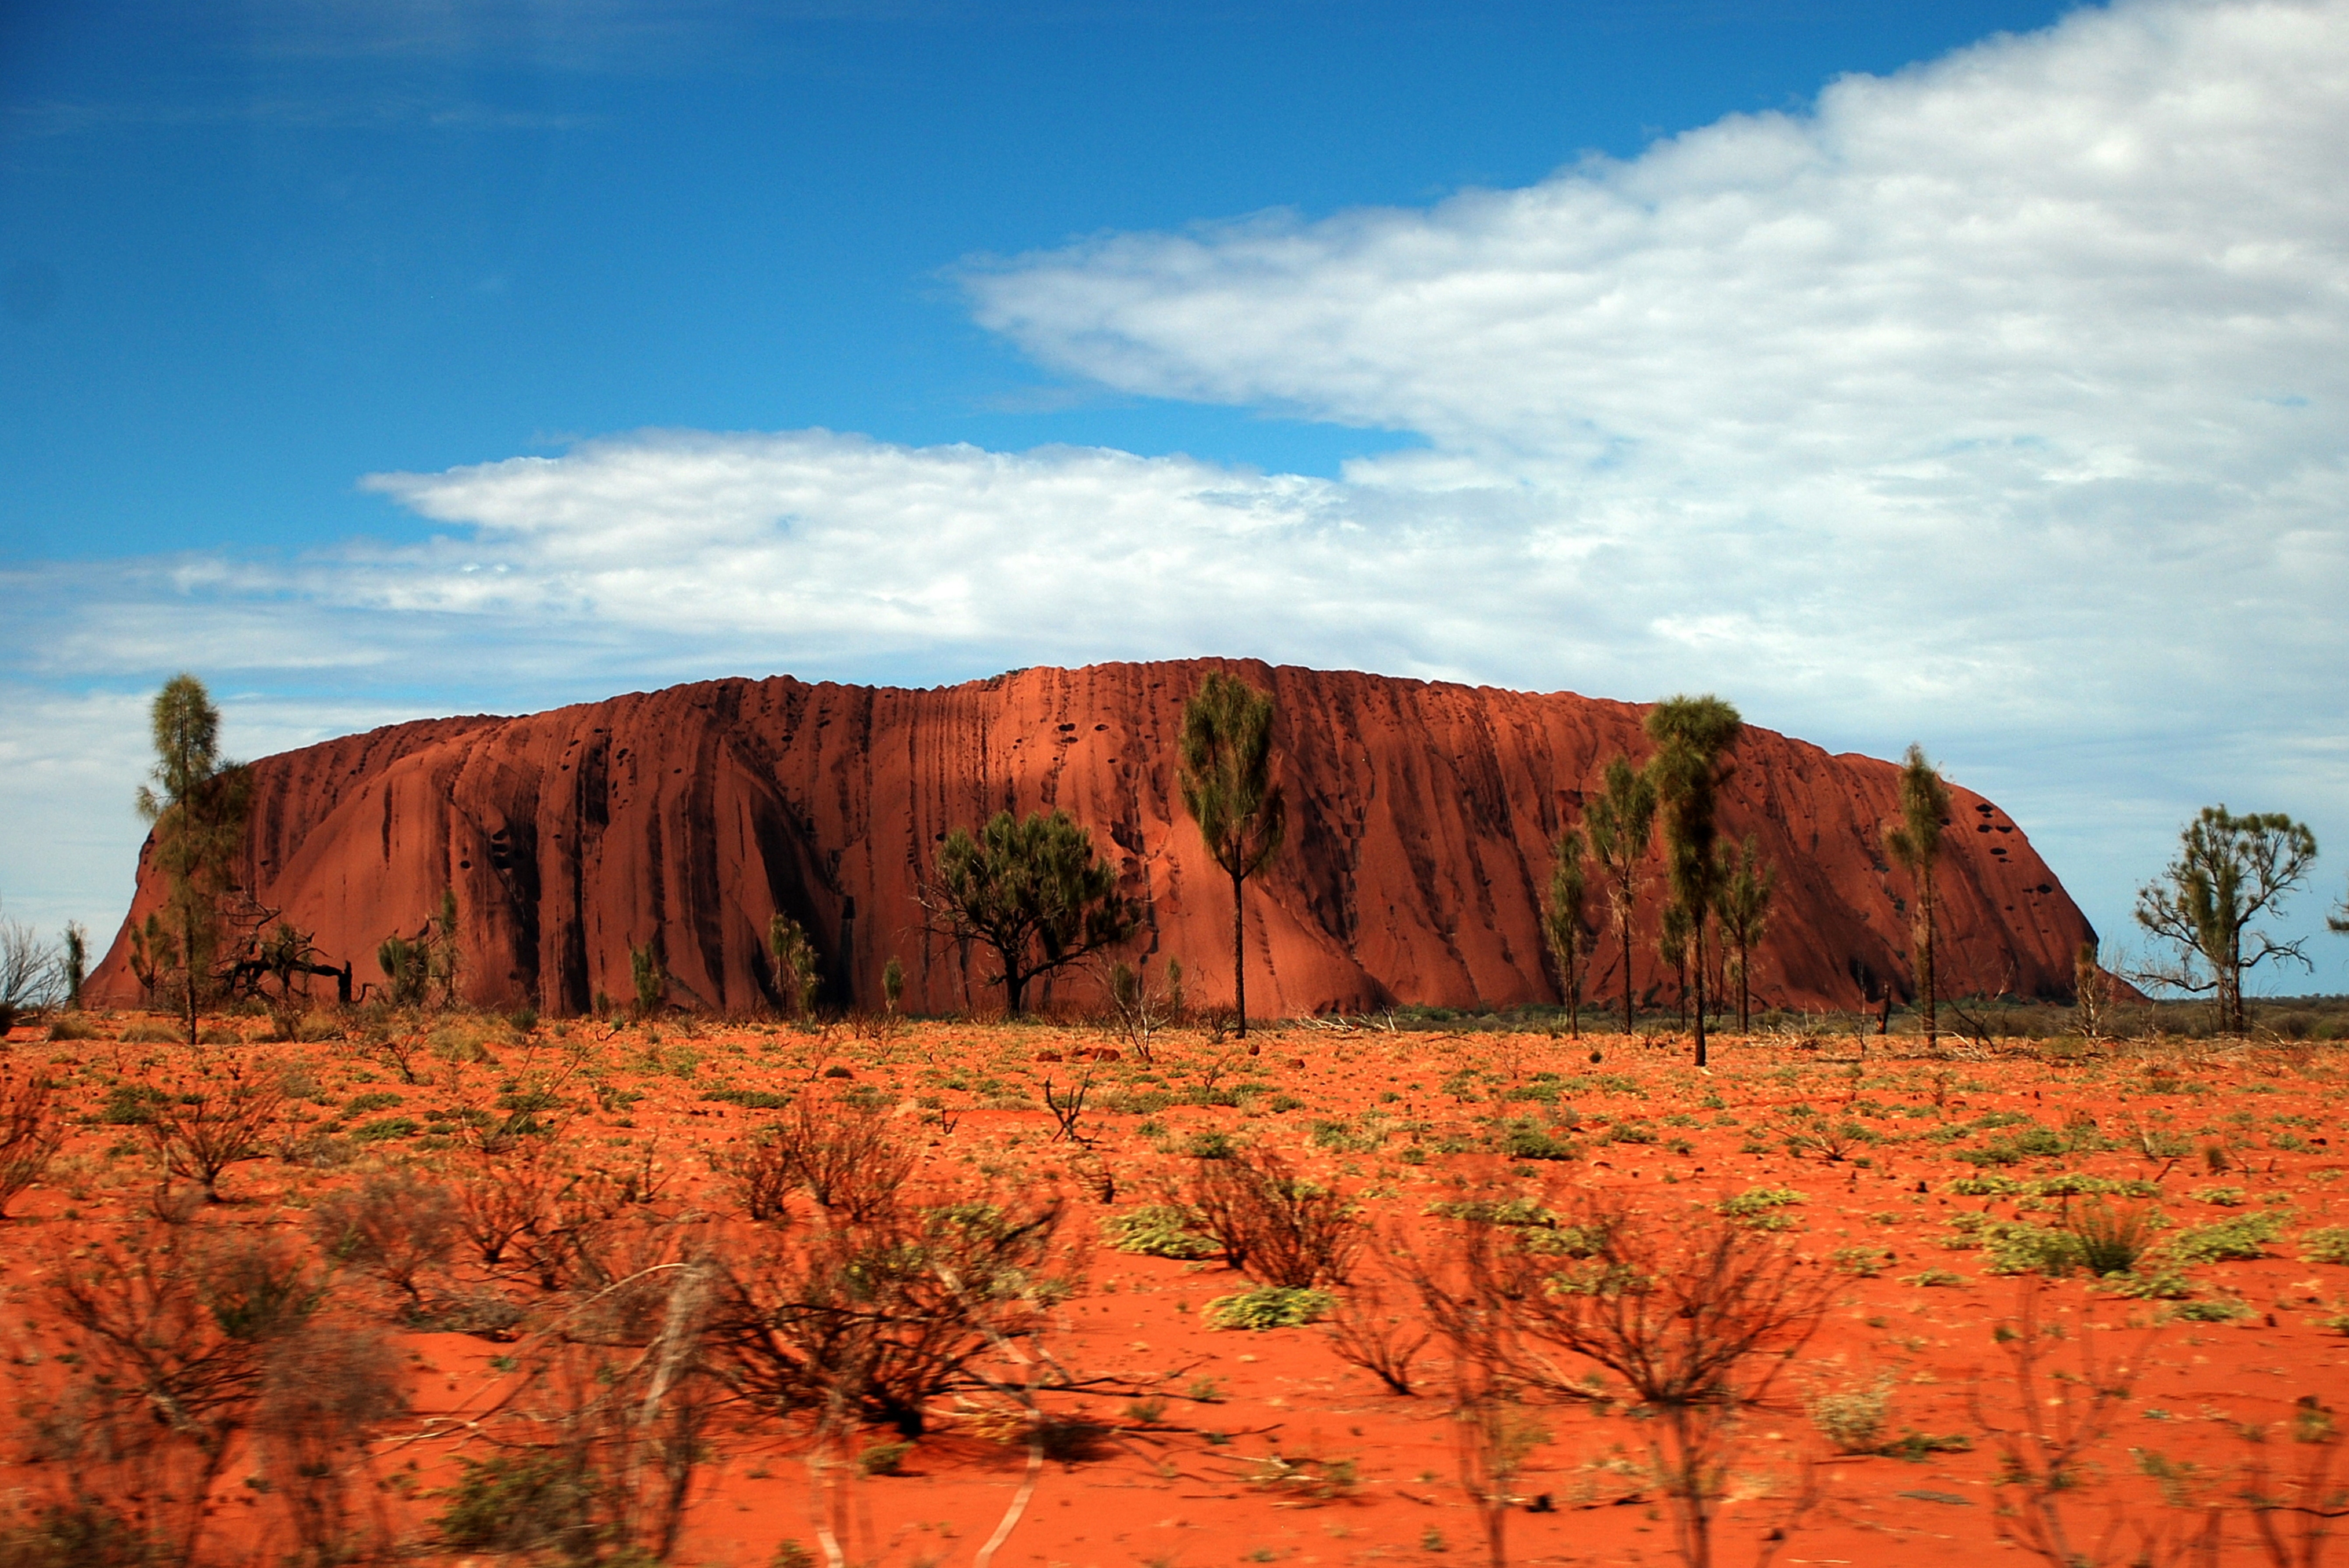 An image of Uluru with the dusty desert sand in the foreground.